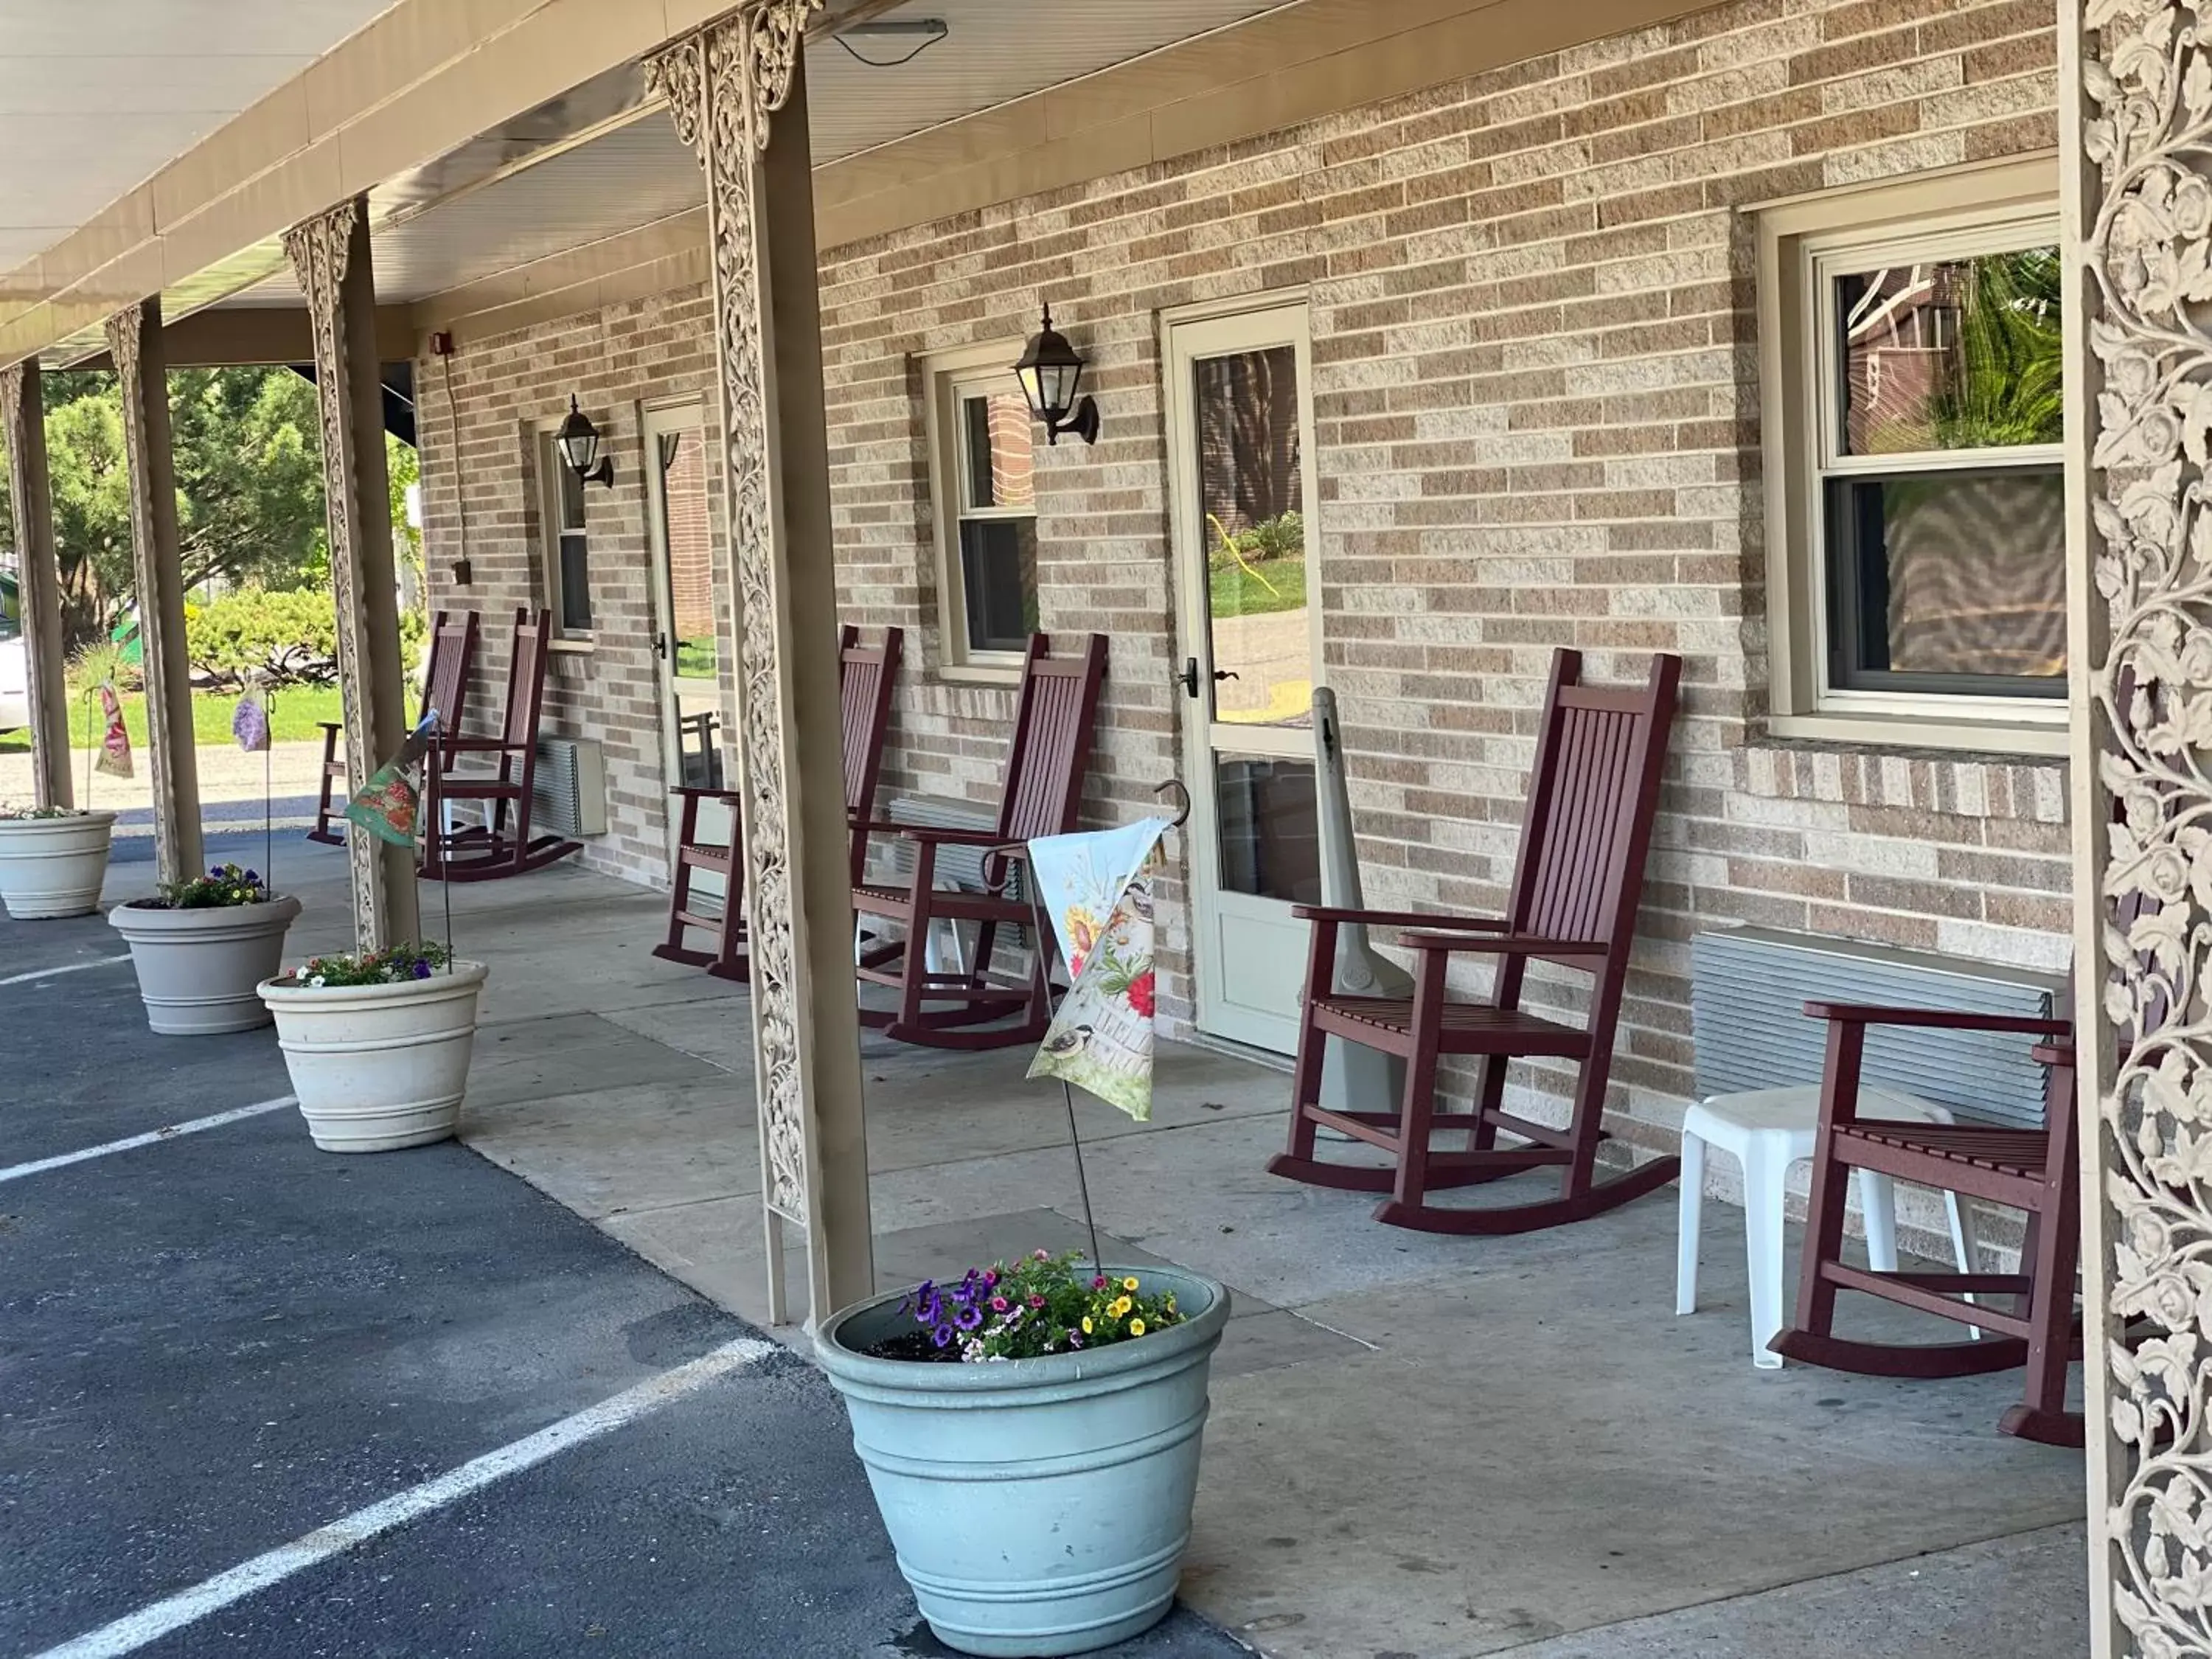 Property building in White Rose Motel - Hershey